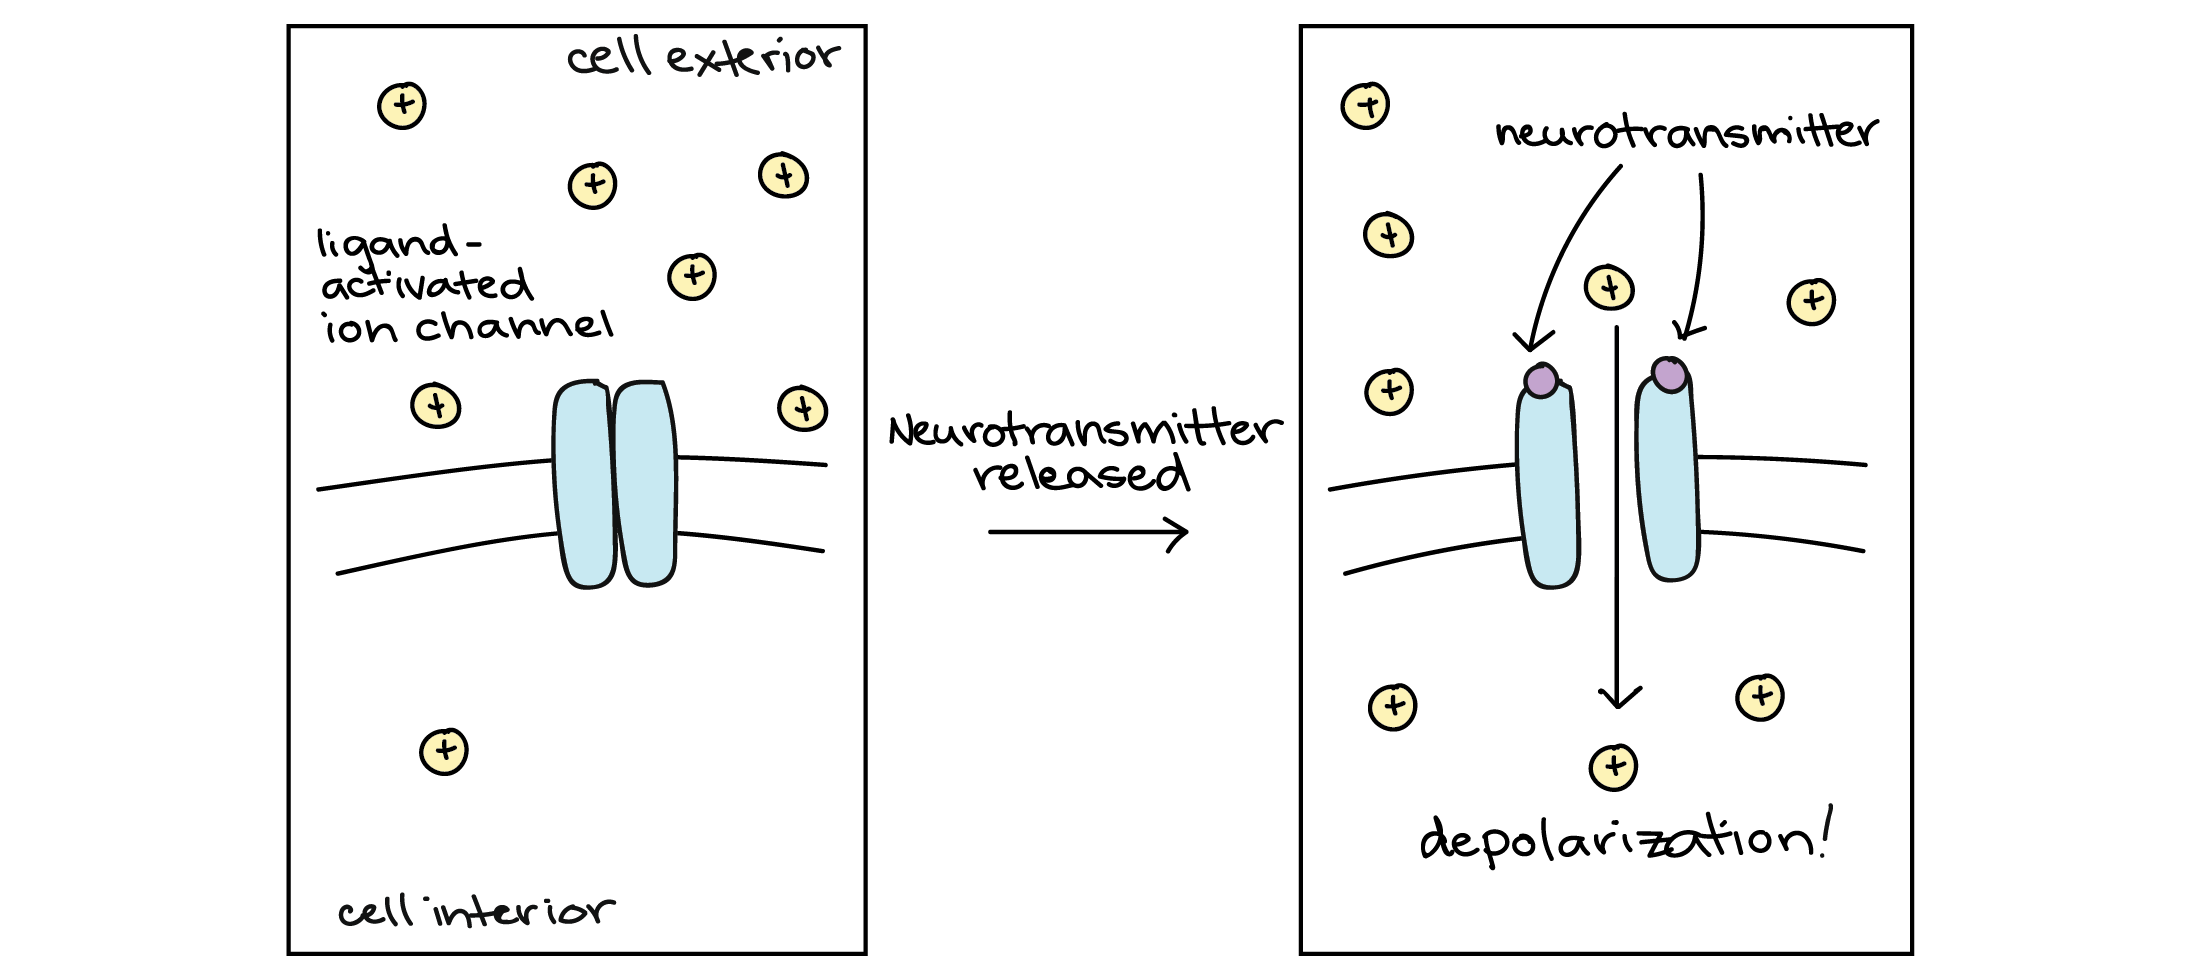 Diagram of ligand-activated channel. When neurotransmitter binds to the channel, it opens and cations flow down their concentration gradient and into the cell, causing a depolarization.